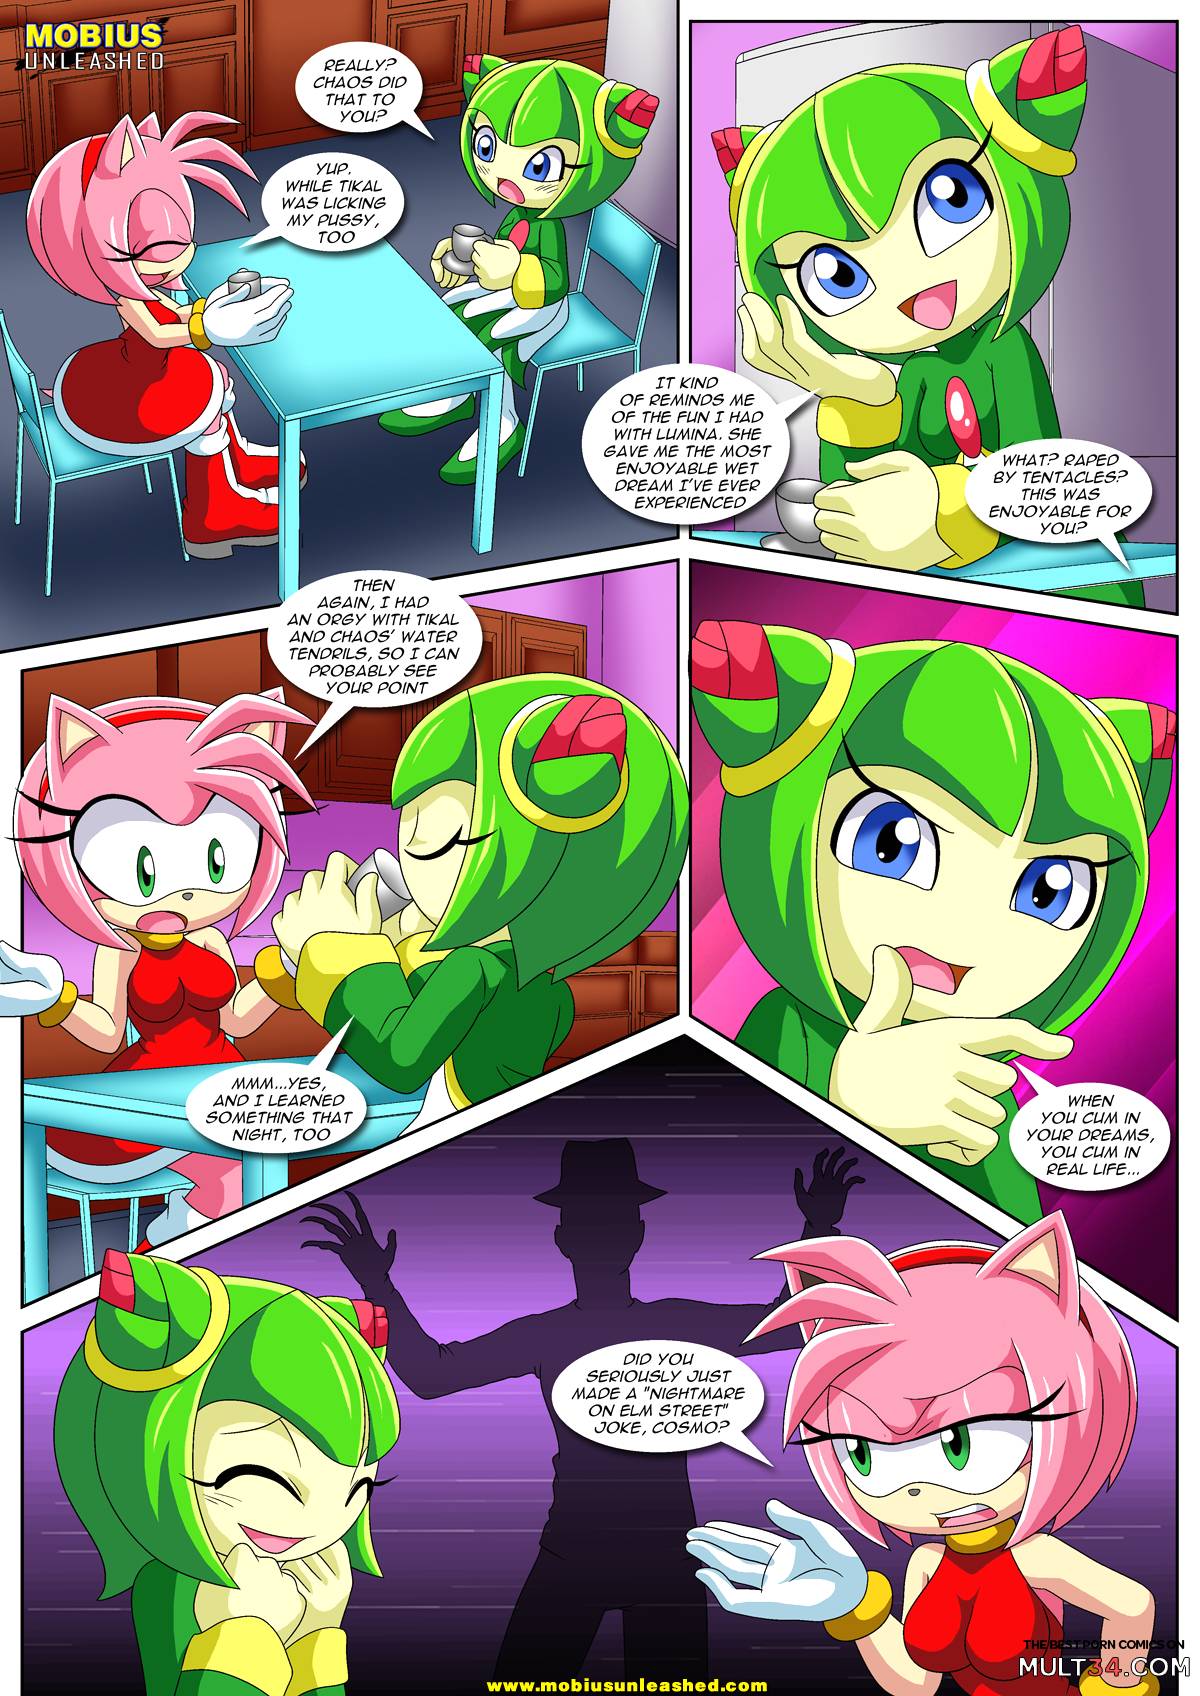 Team GFs' Tentacled Tale page 2